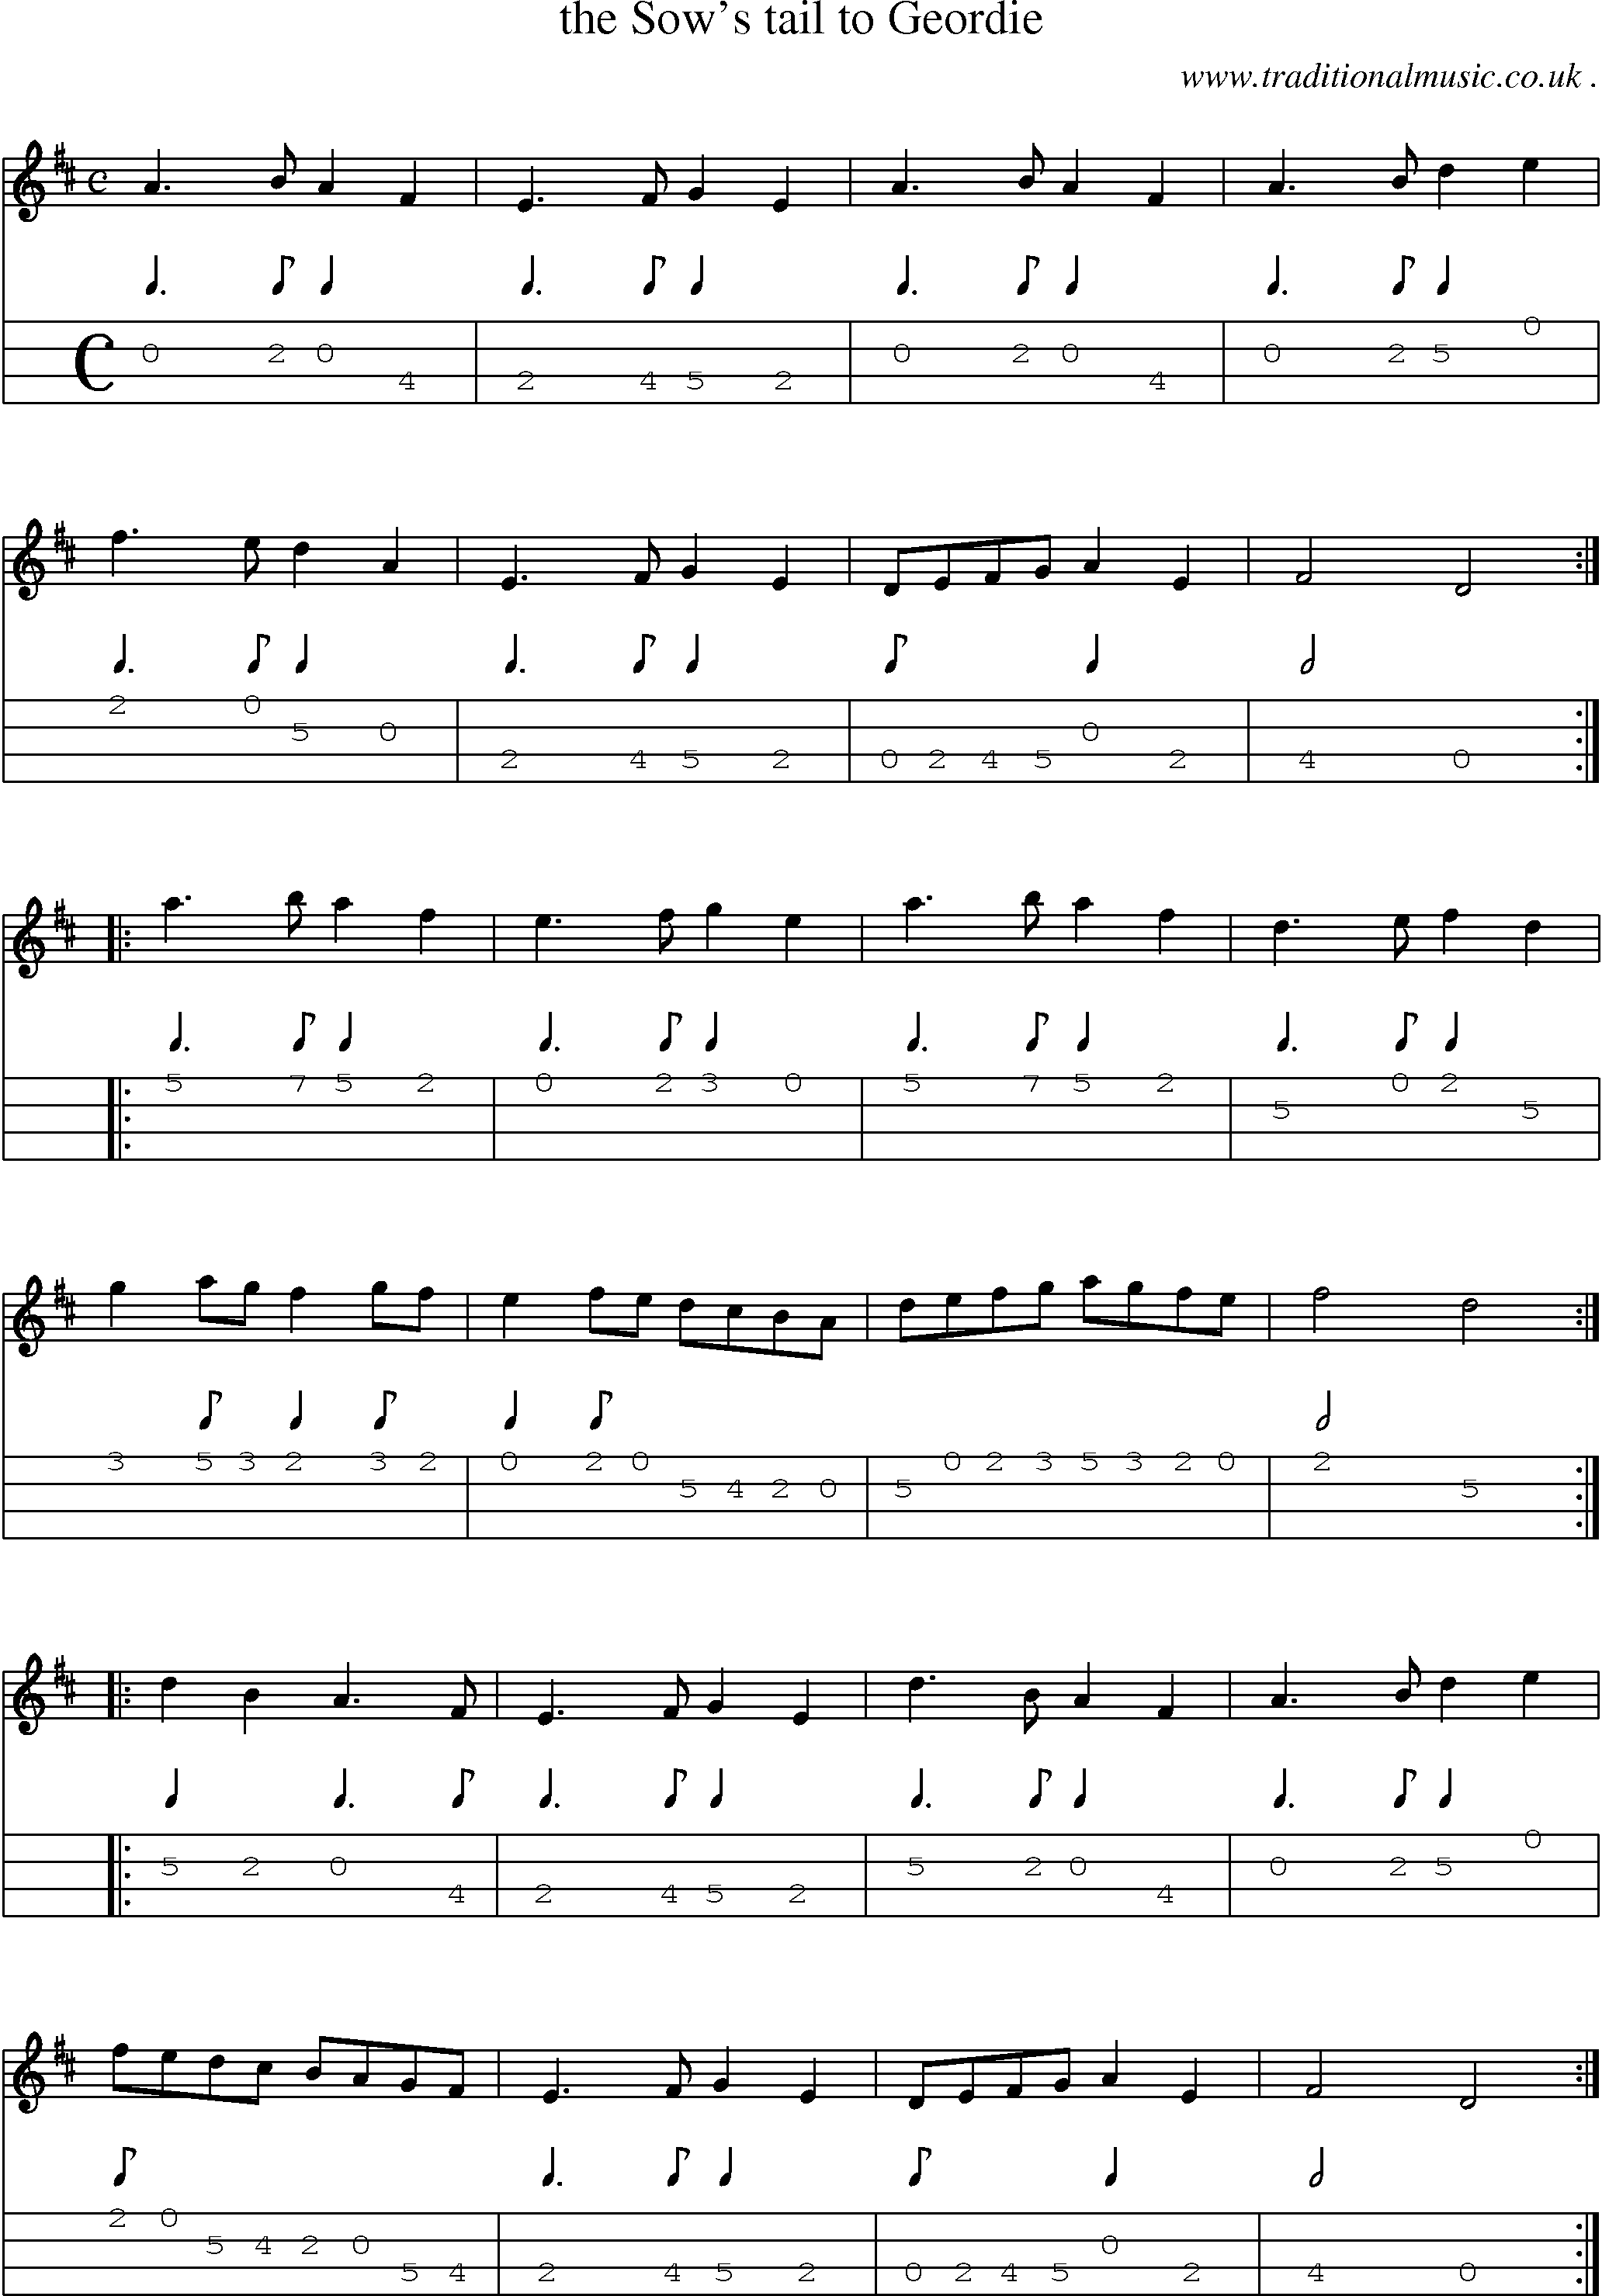 Sheet-Music and Mandolin Tabs for The Sow Tail To Geordie